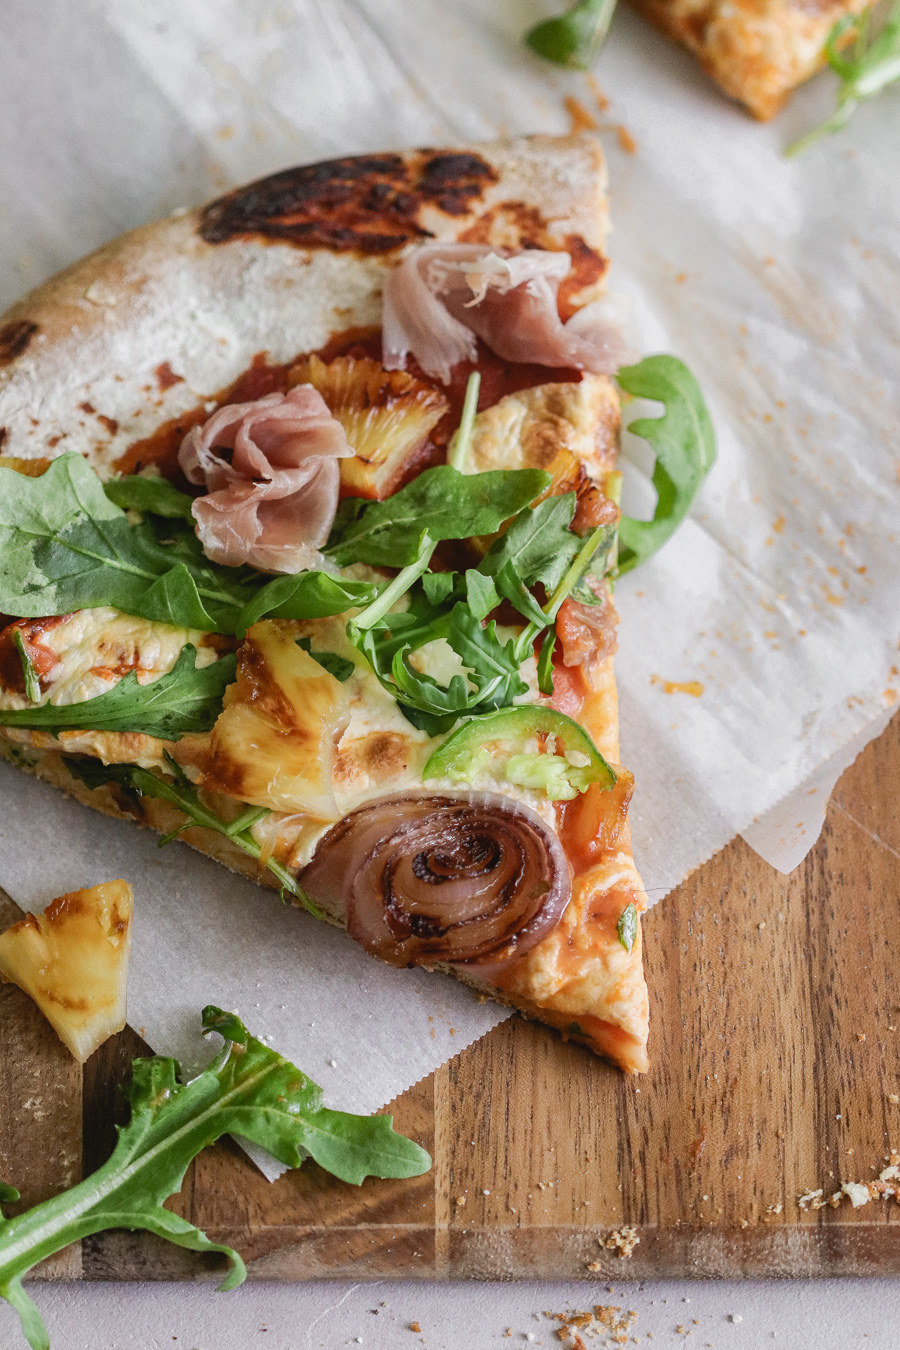 A slice of pizza with arugula, pineapple, and prosciutto.